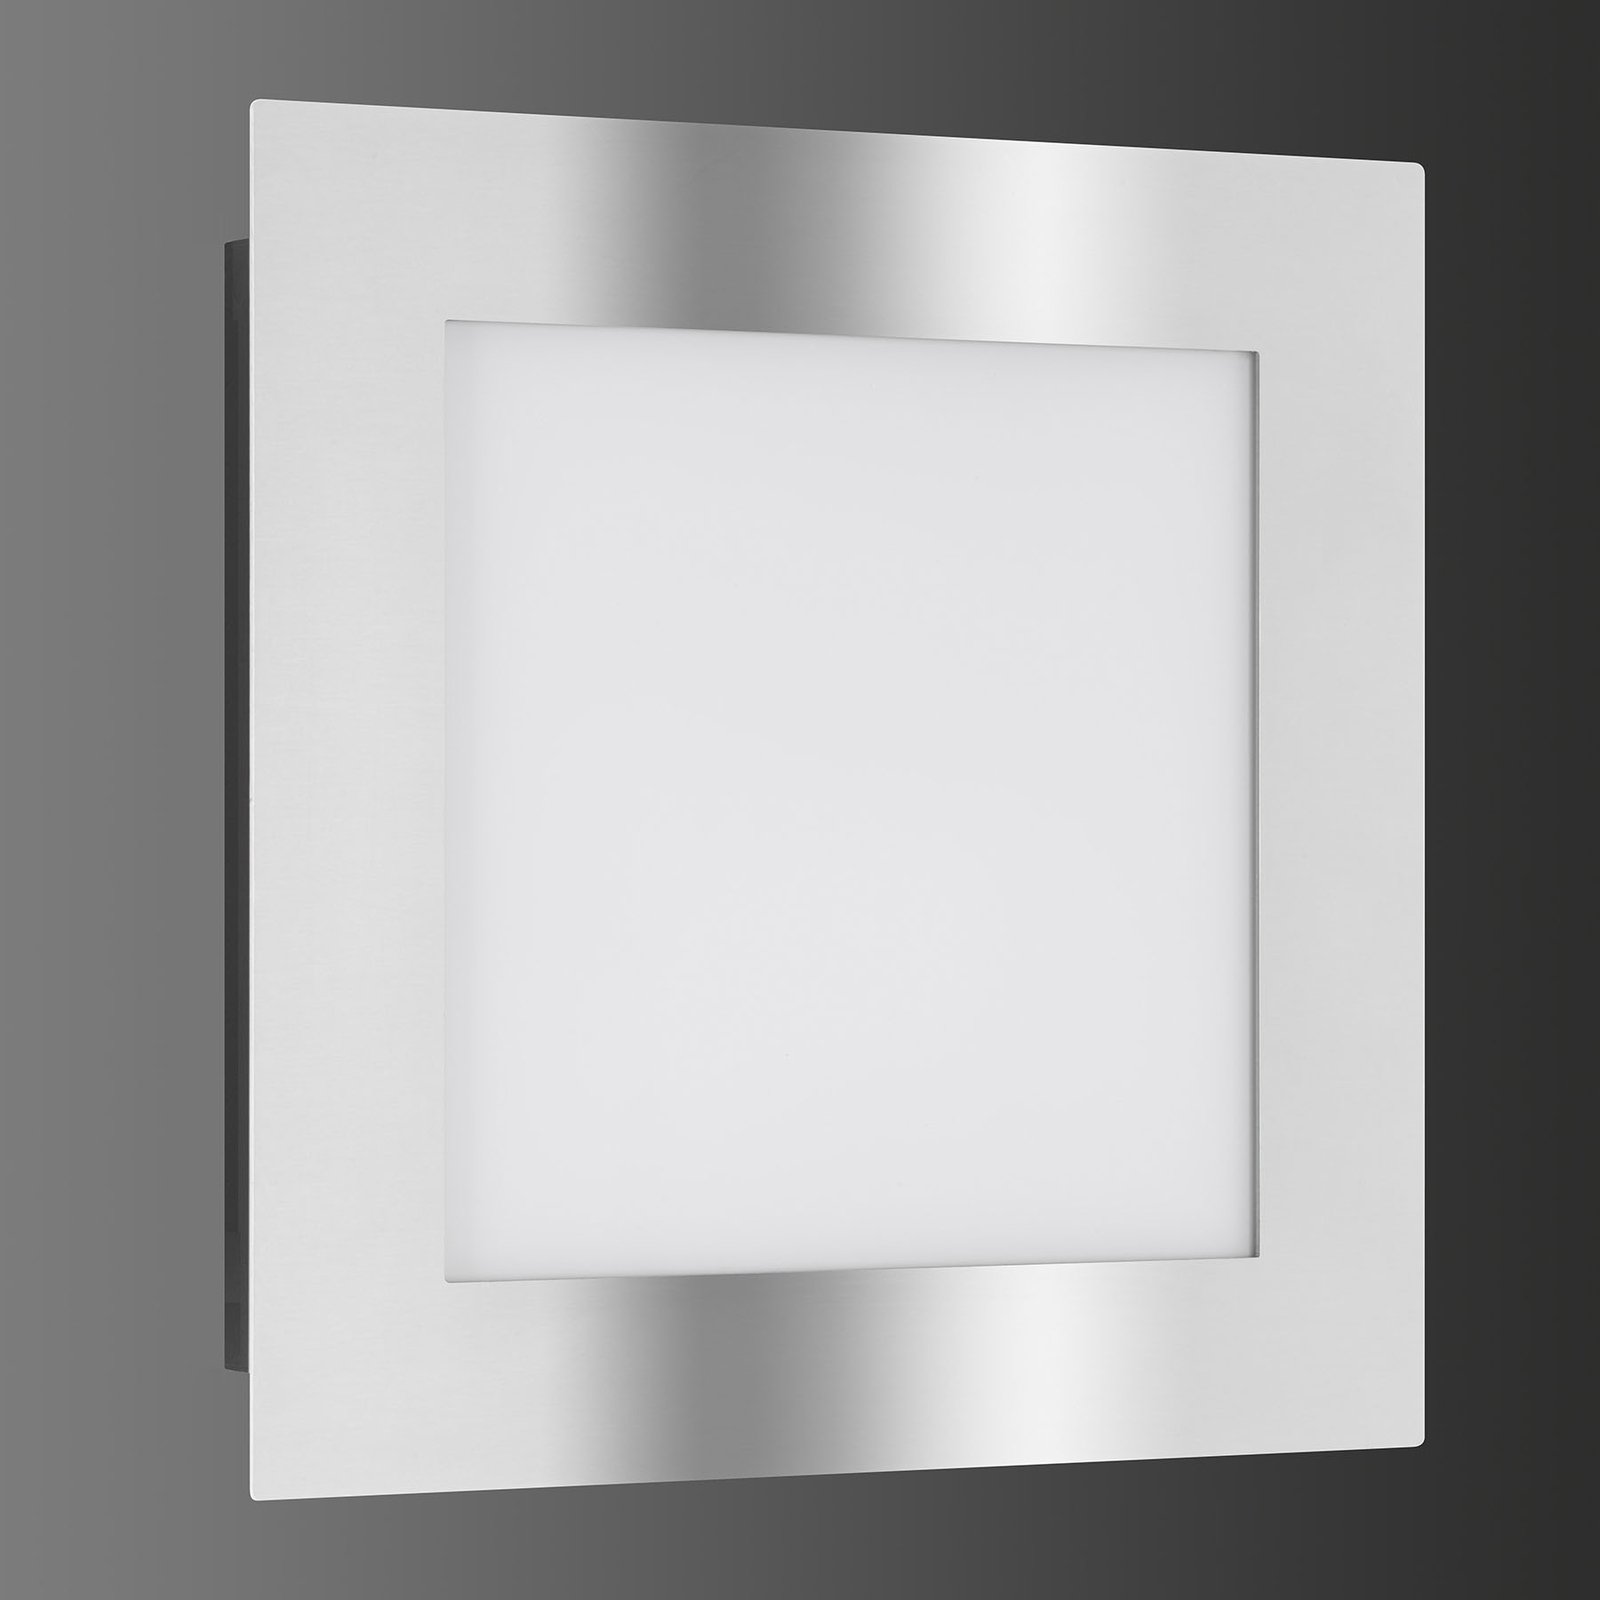 3006 LED outdoor wall light, stainless steel